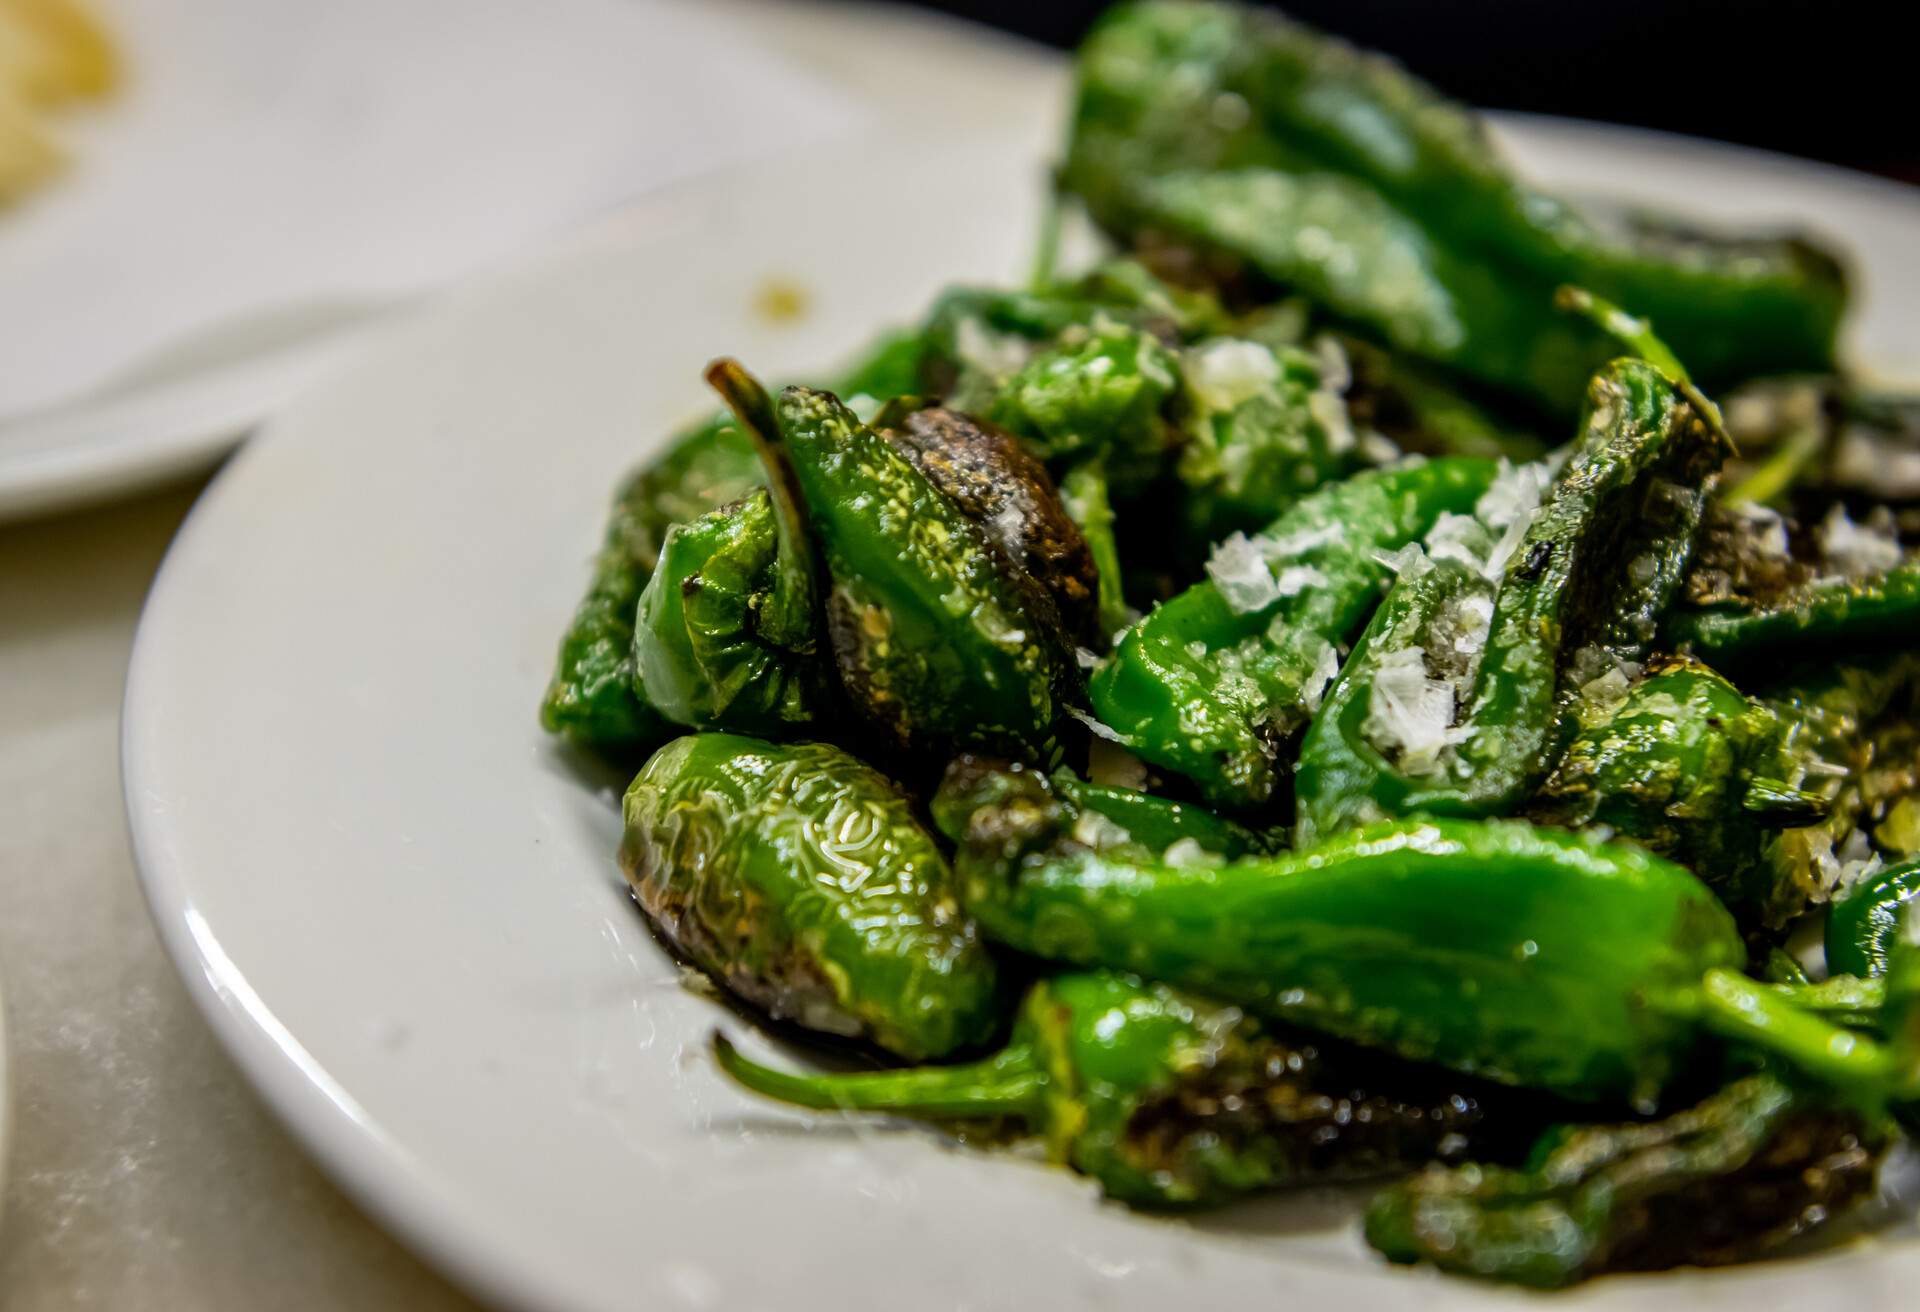 Delicious Padrón peppers, glistening with olive oil and sprinkled with coarse sea salt, are enticingly arranged on a plate.